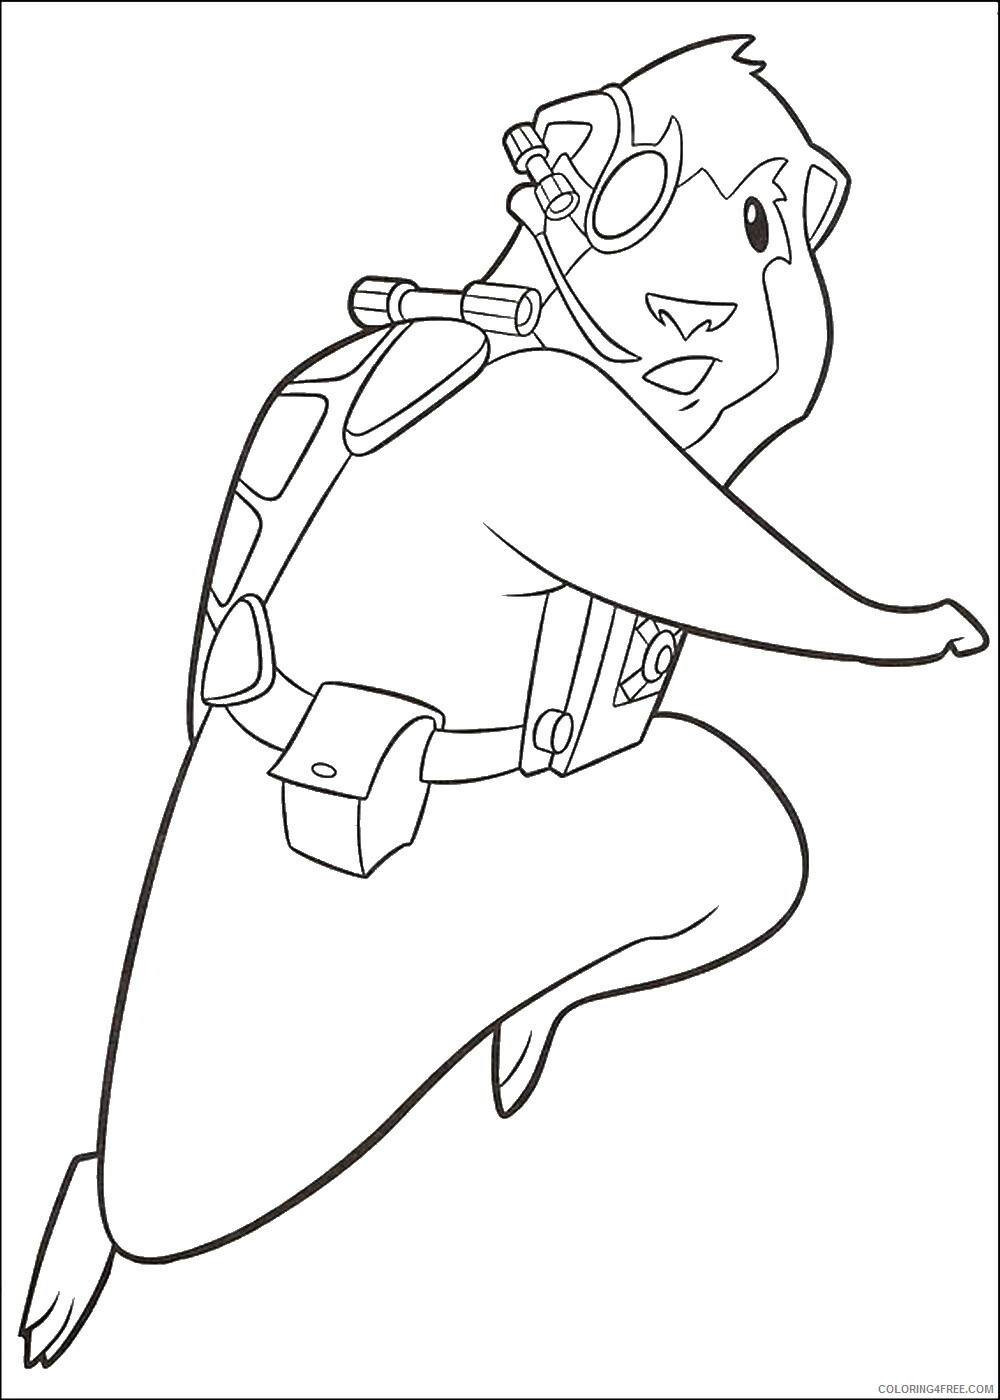 G Force Coloring Pages TV Film g_force_cl_06 Printable 2020 03269 Coloring4free